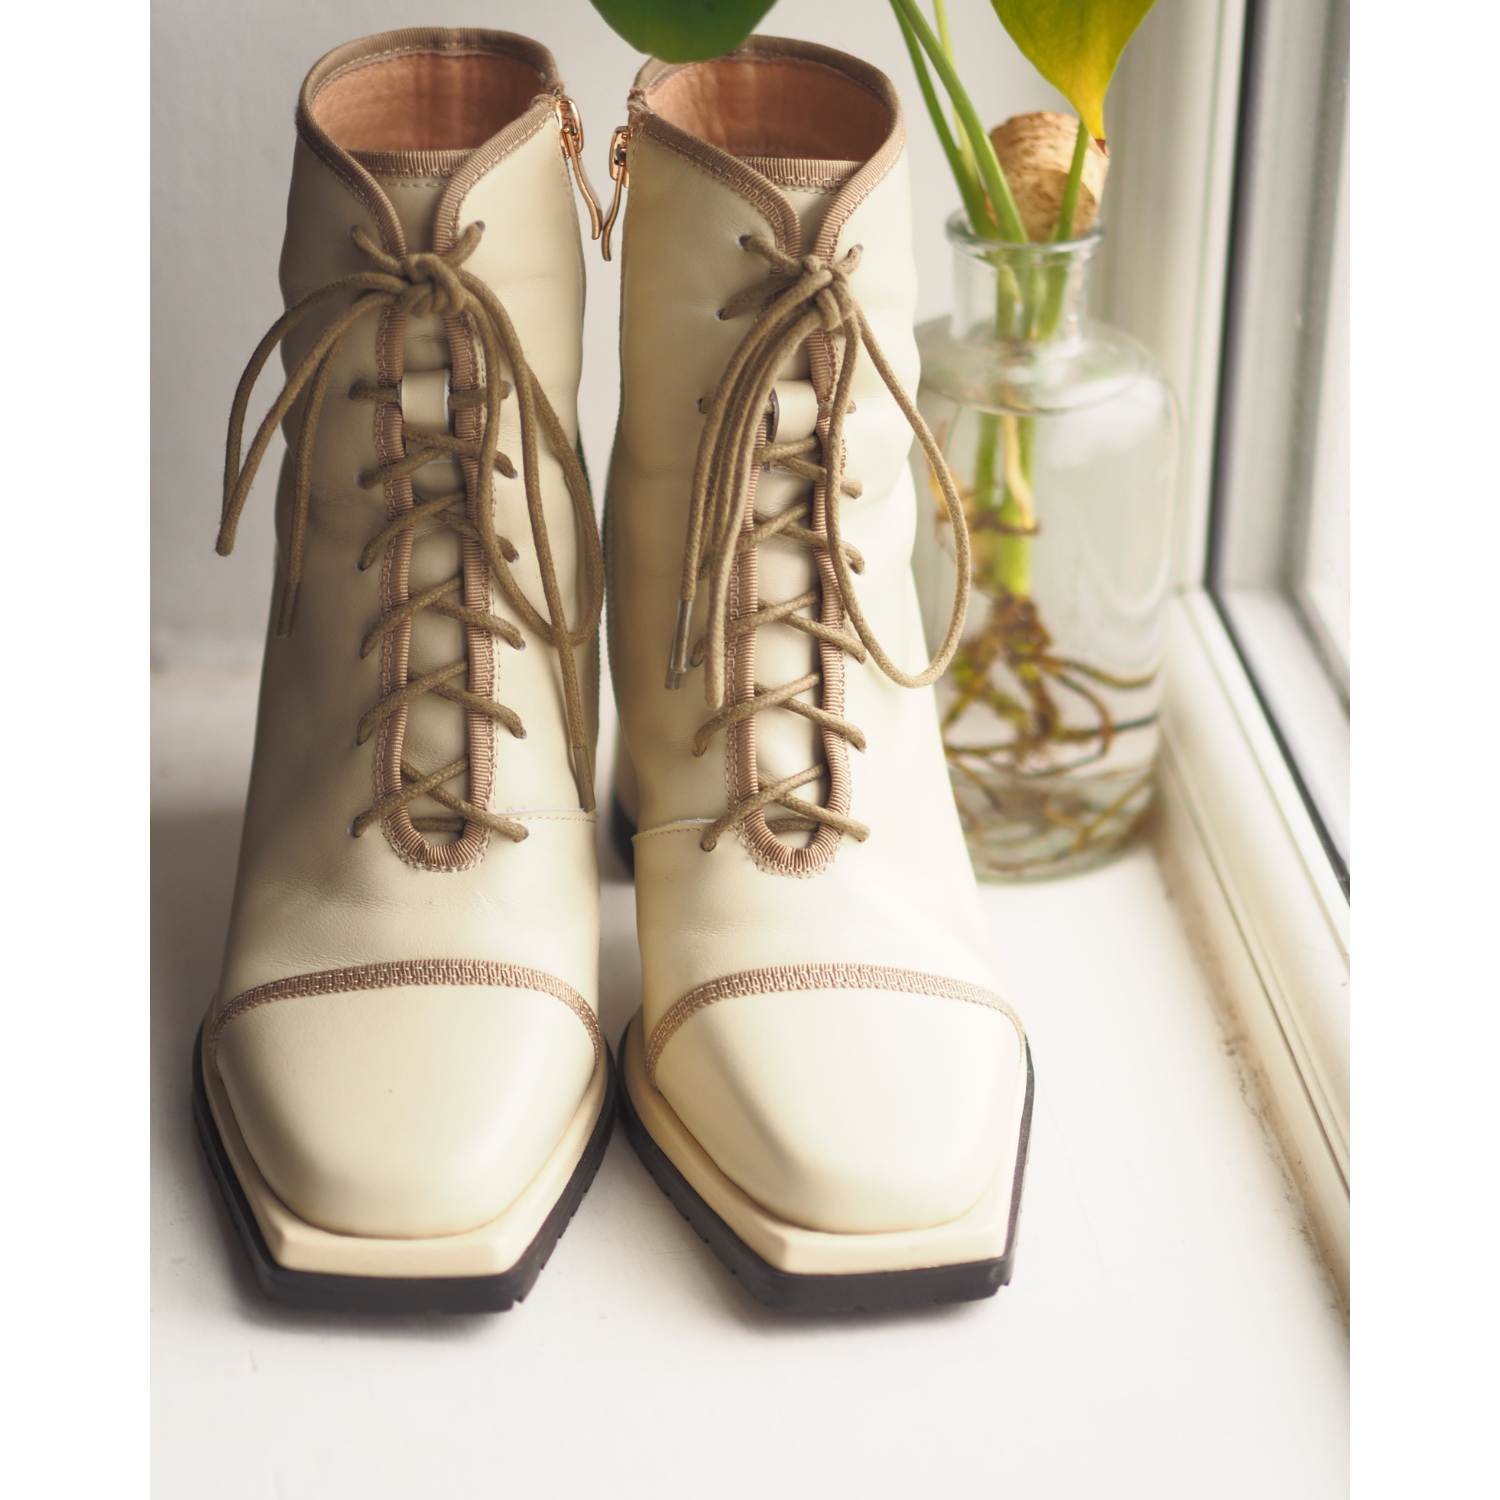 Ankle Vintage Leather Boots with Cord Laces Zalinah White 